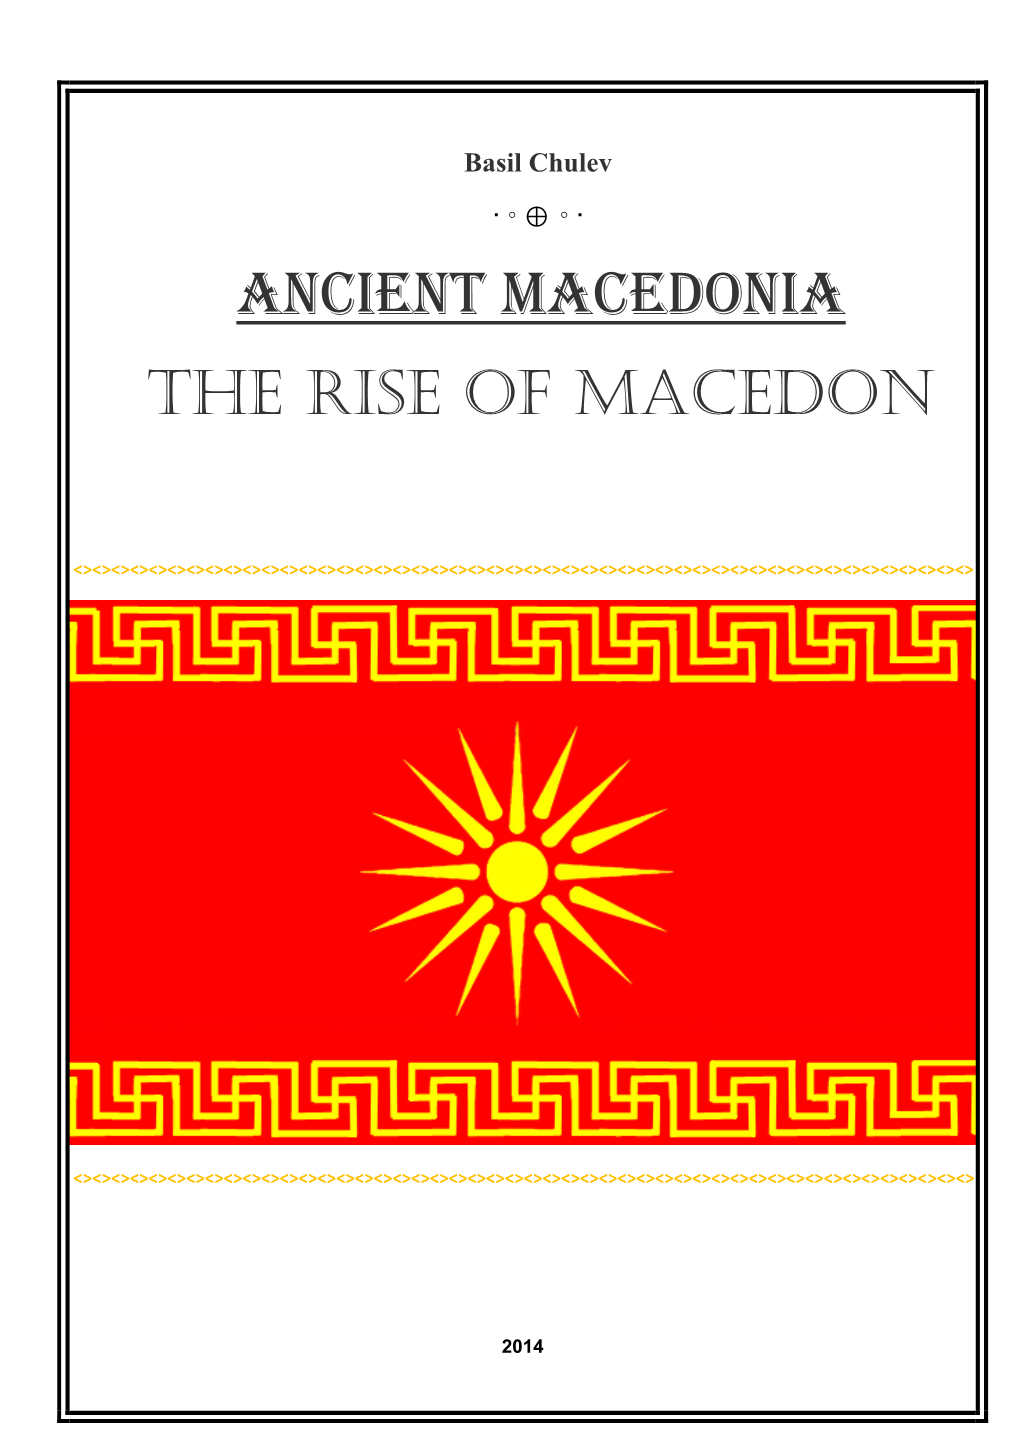 The Intention of This Essay Is to Provide Simple and Easy to Understand Overview of Periods from Ancient Macedonian History and Culture